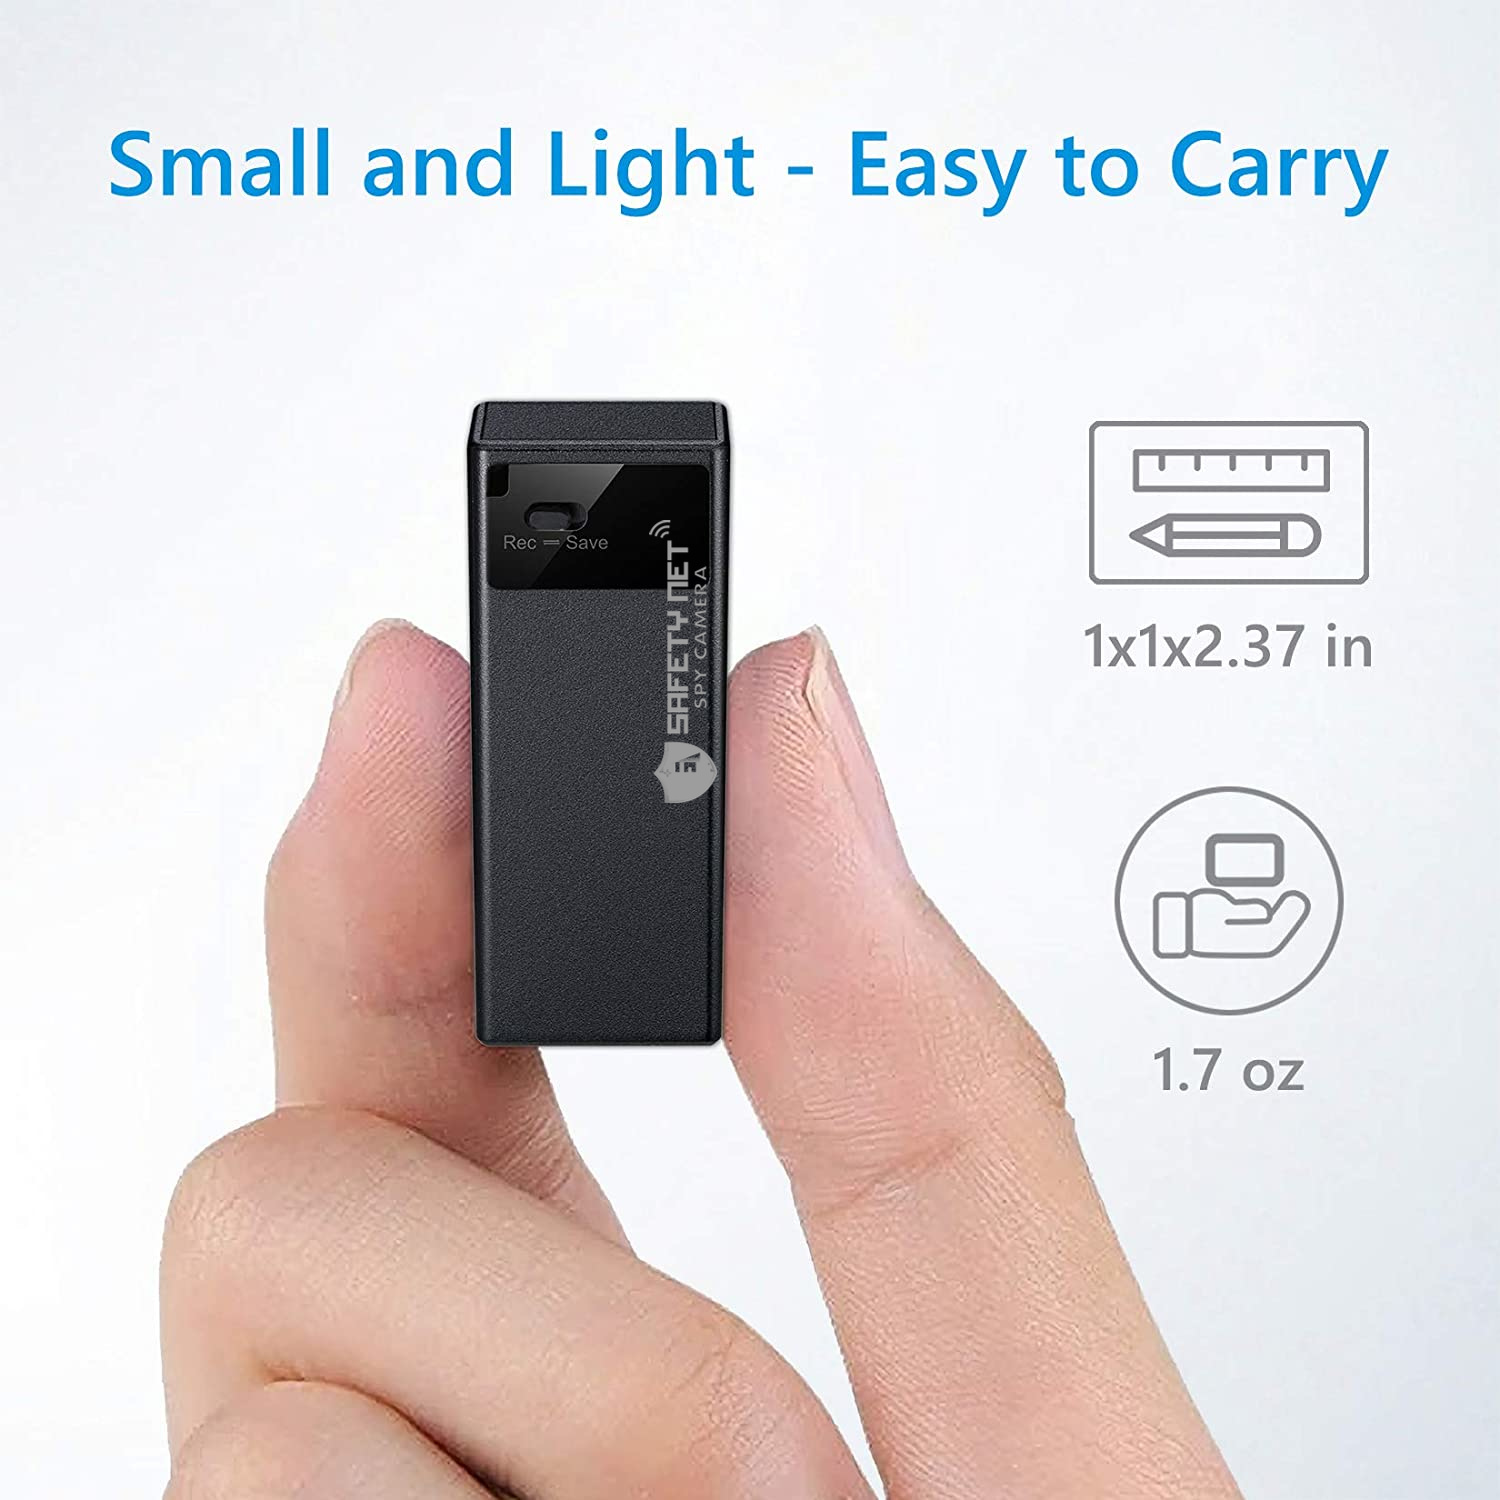 SAFETY NET 2020 Newest Portable Mini Voice Recorder with Password for Study, Business Meetings and Self-Creation , Magnetic with 15 Days Constant Recording With Inbuilt 64 GB SD CARD